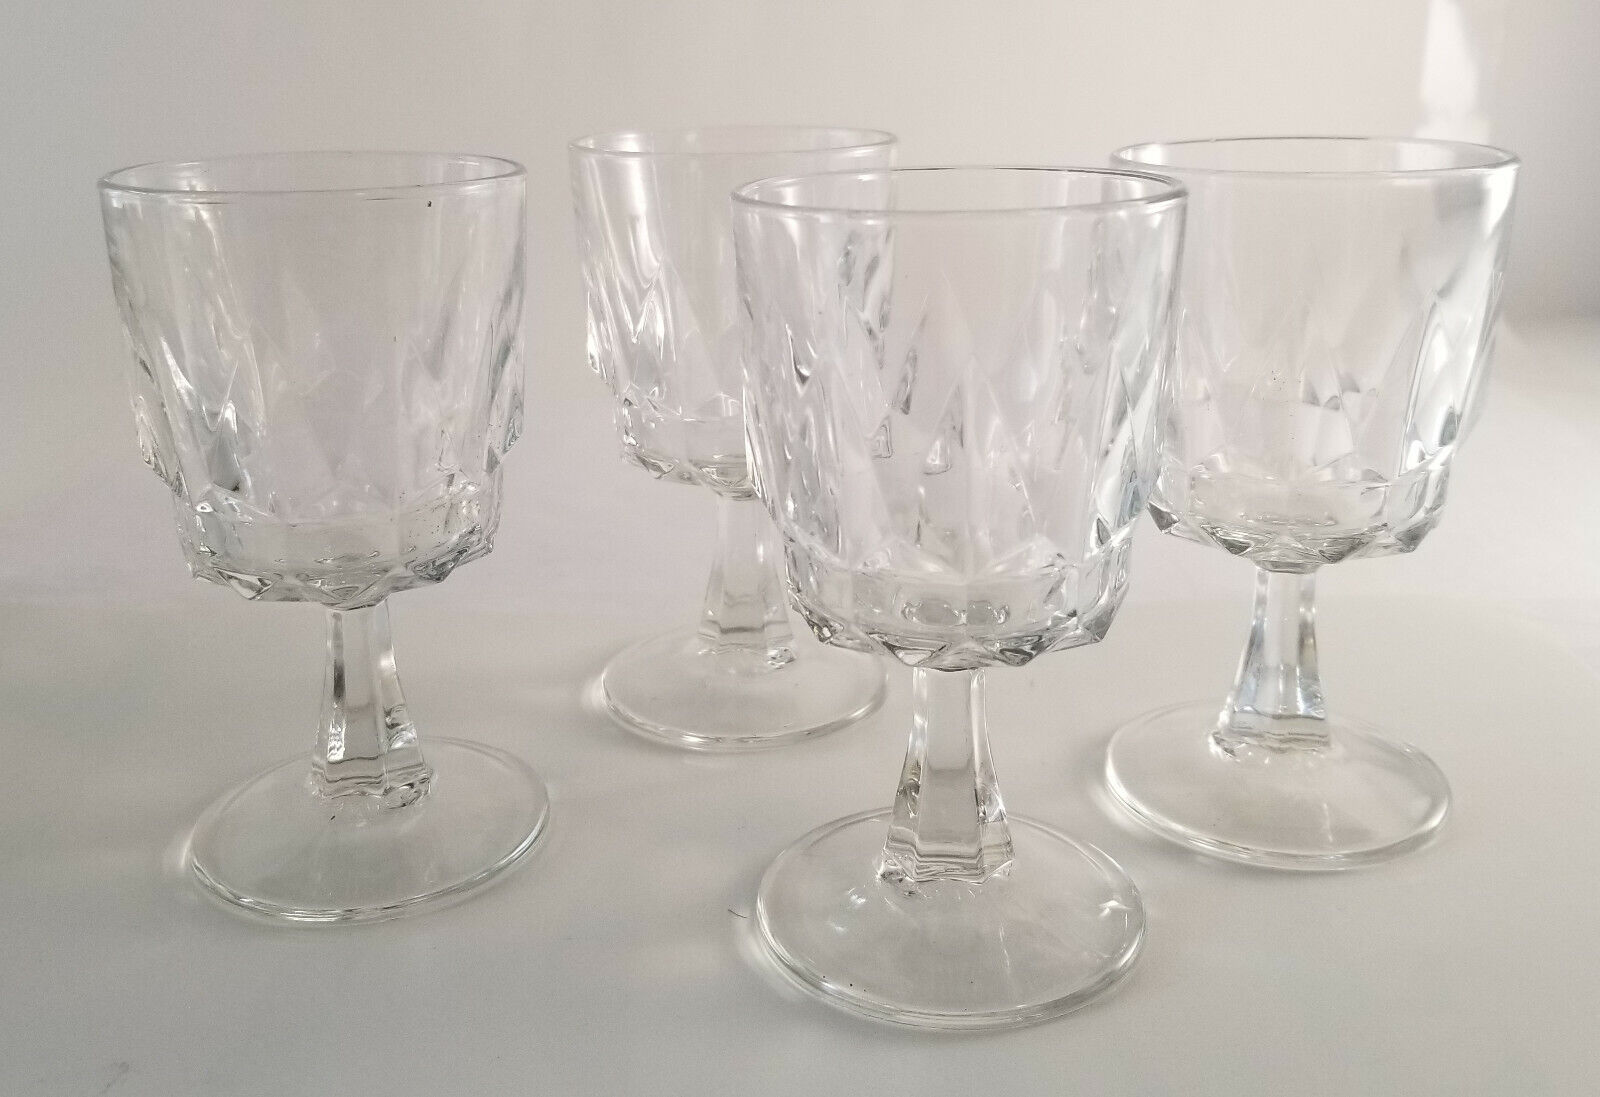 Vintage Crystal Arcoroc Wine/Water Goblets Carved Stems 8 oz Set Of 4 France Arcoroc of France does not apply